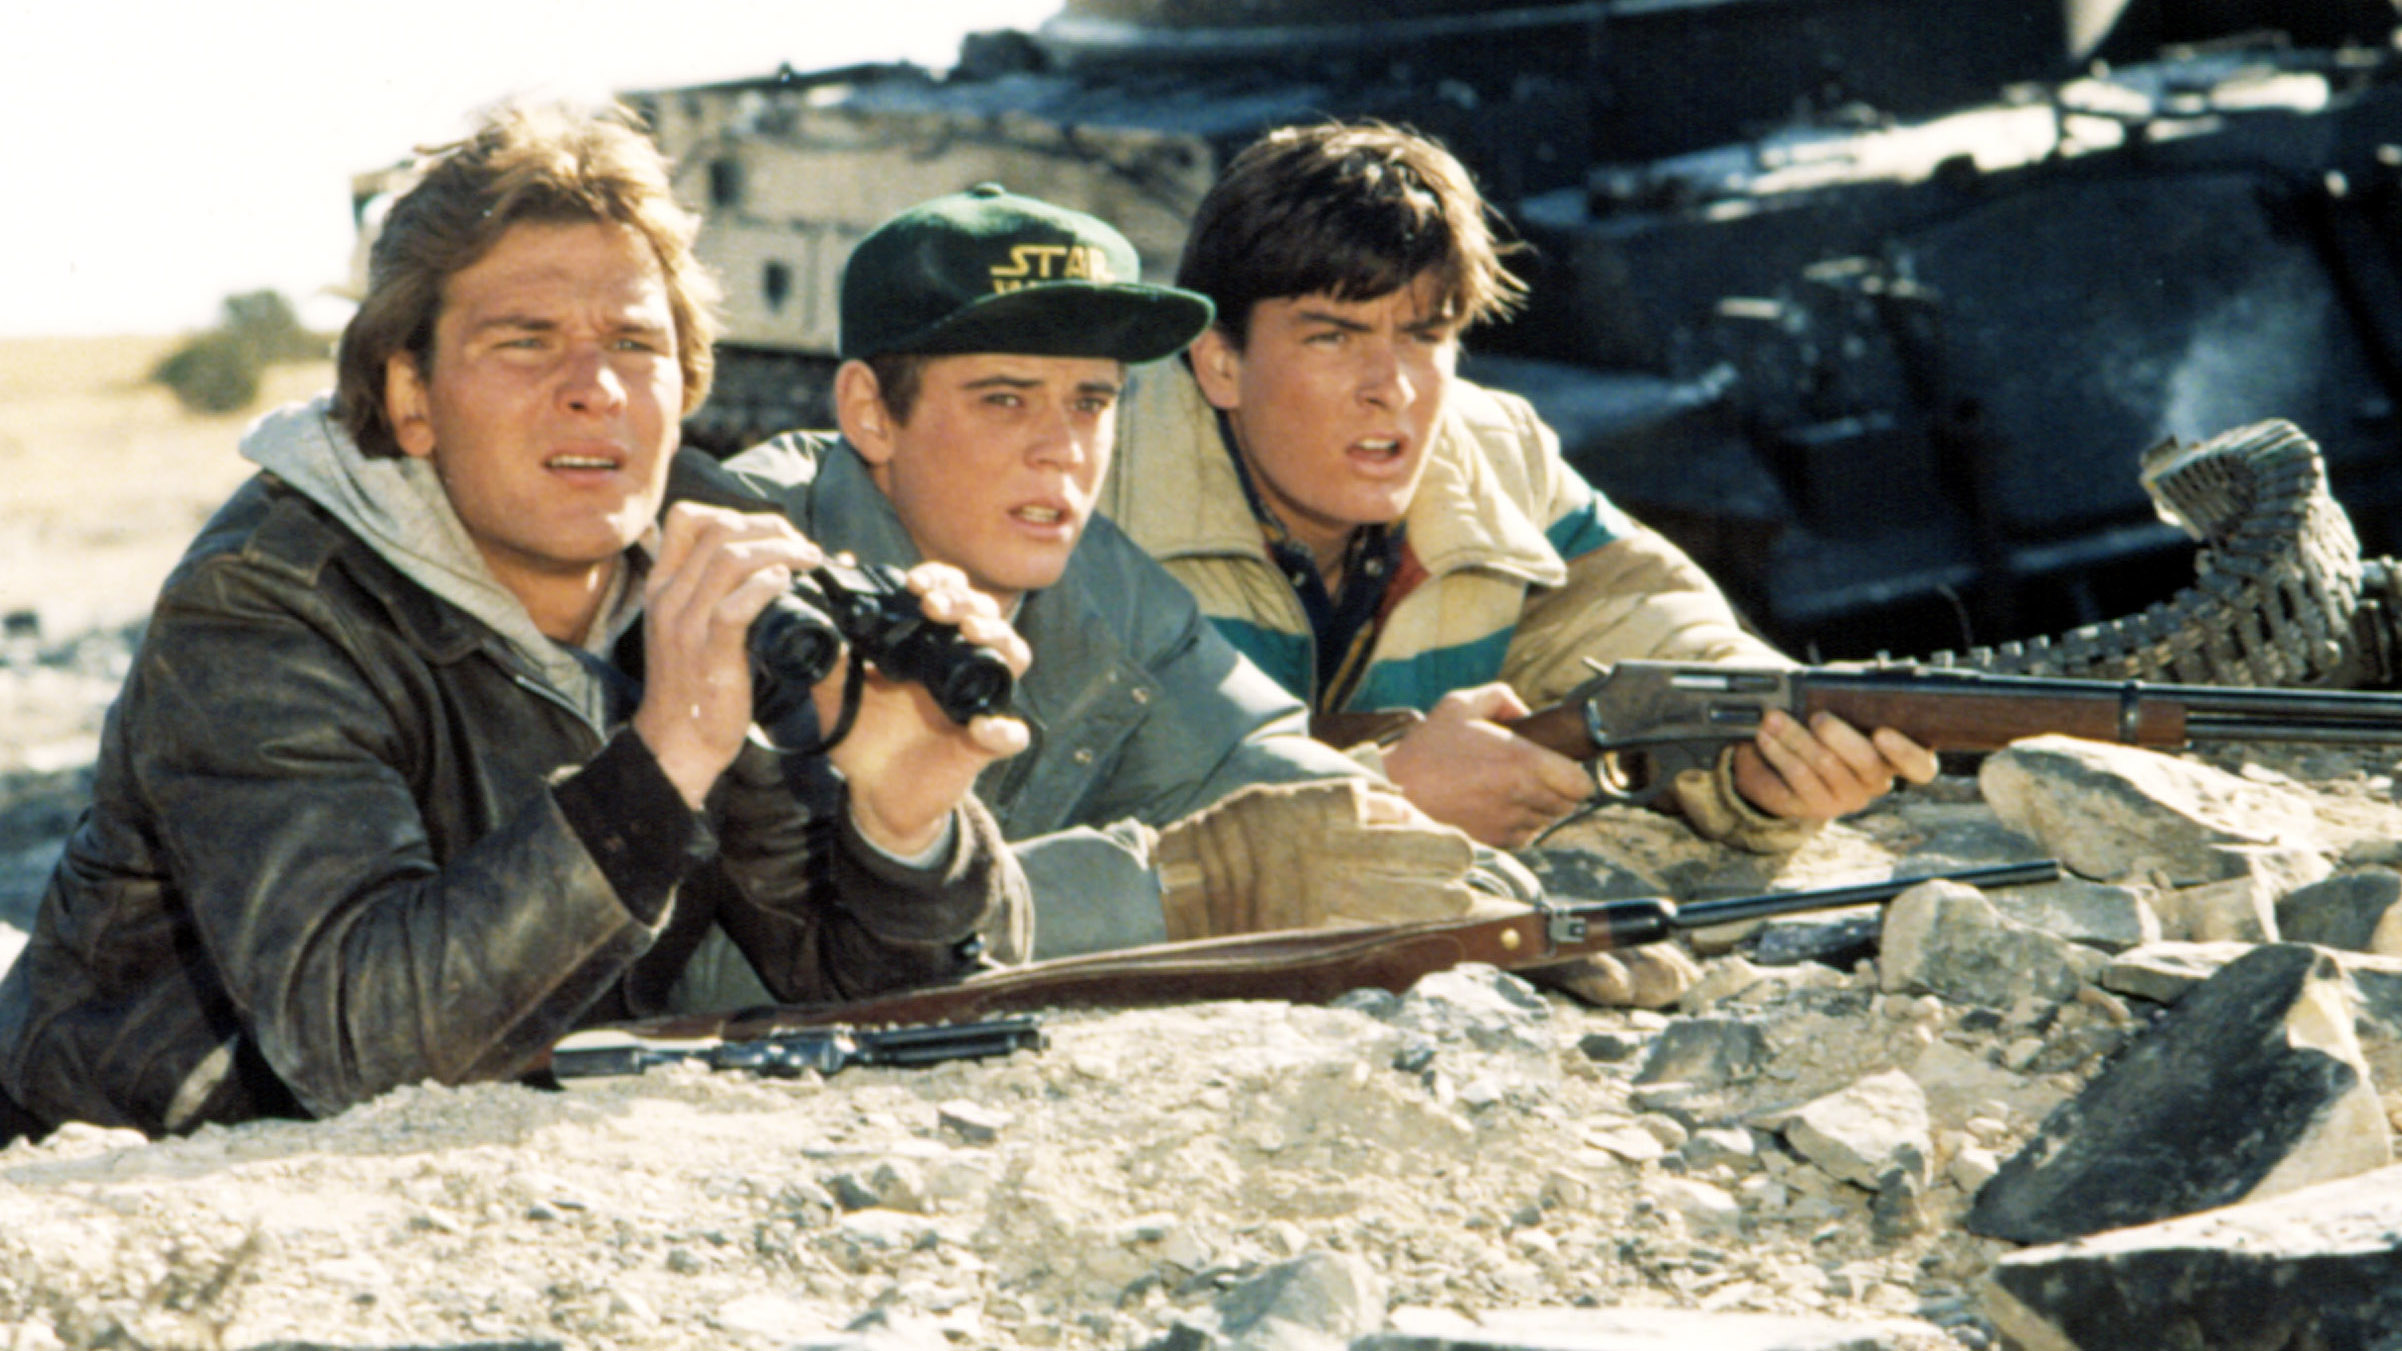 RED DAWN, Patrick Swayze, C. Thomas Howell, Charlie Sheen, 1984, 